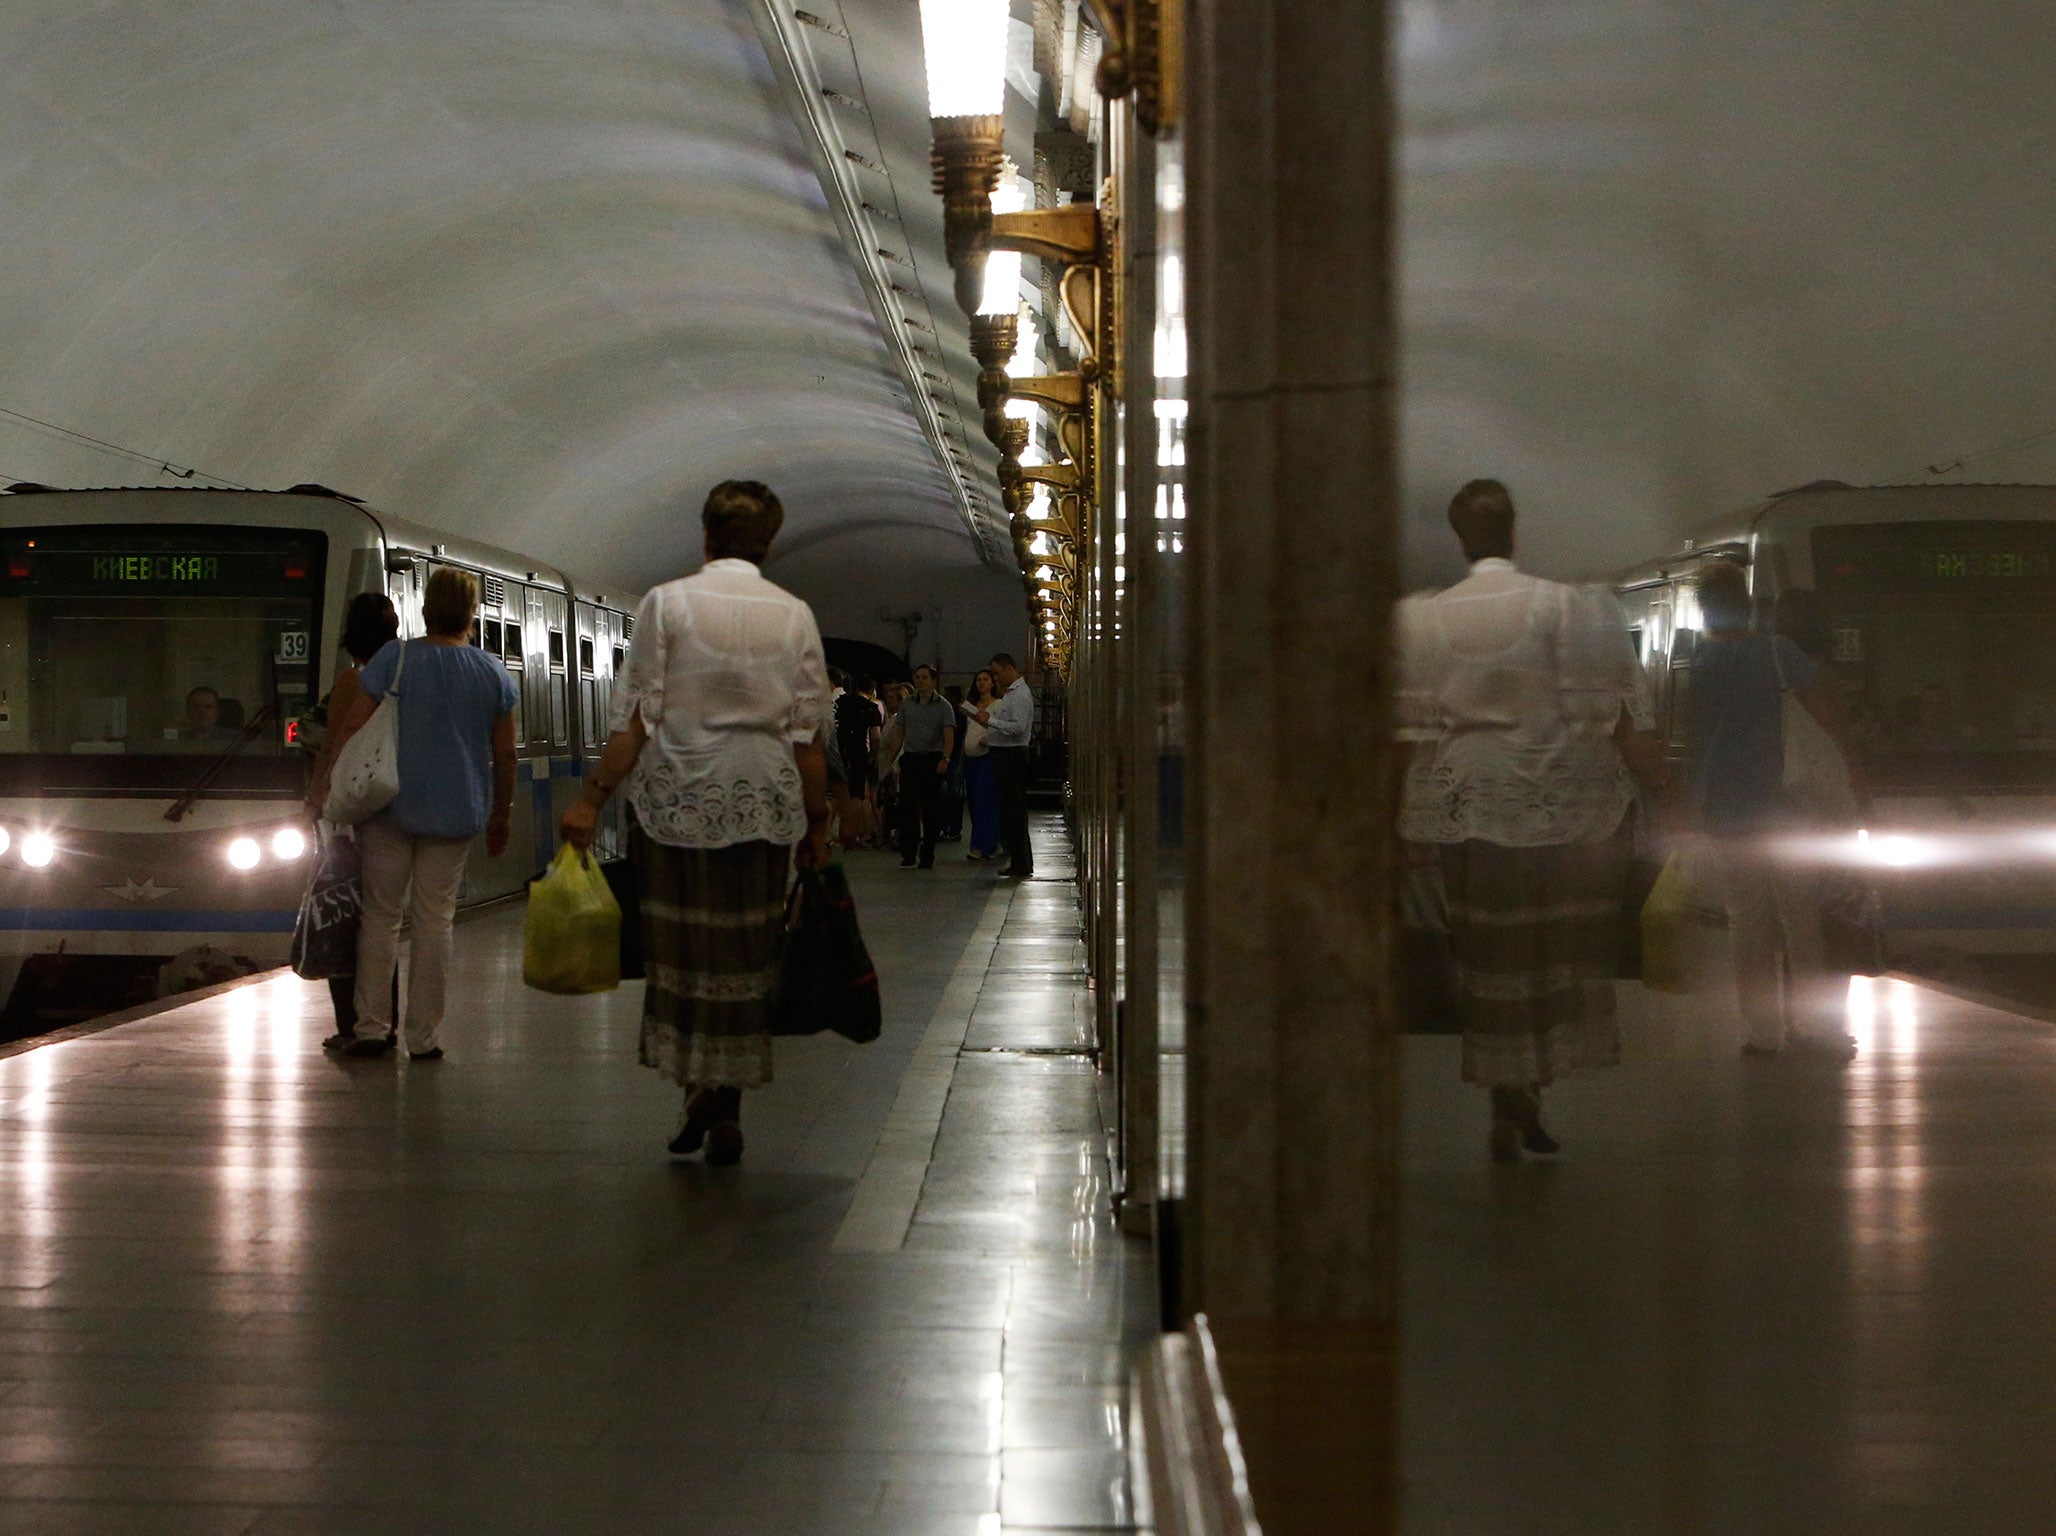 Commuters stand on a platform as a metro train arrives at a station in Moscow July 16, 2014